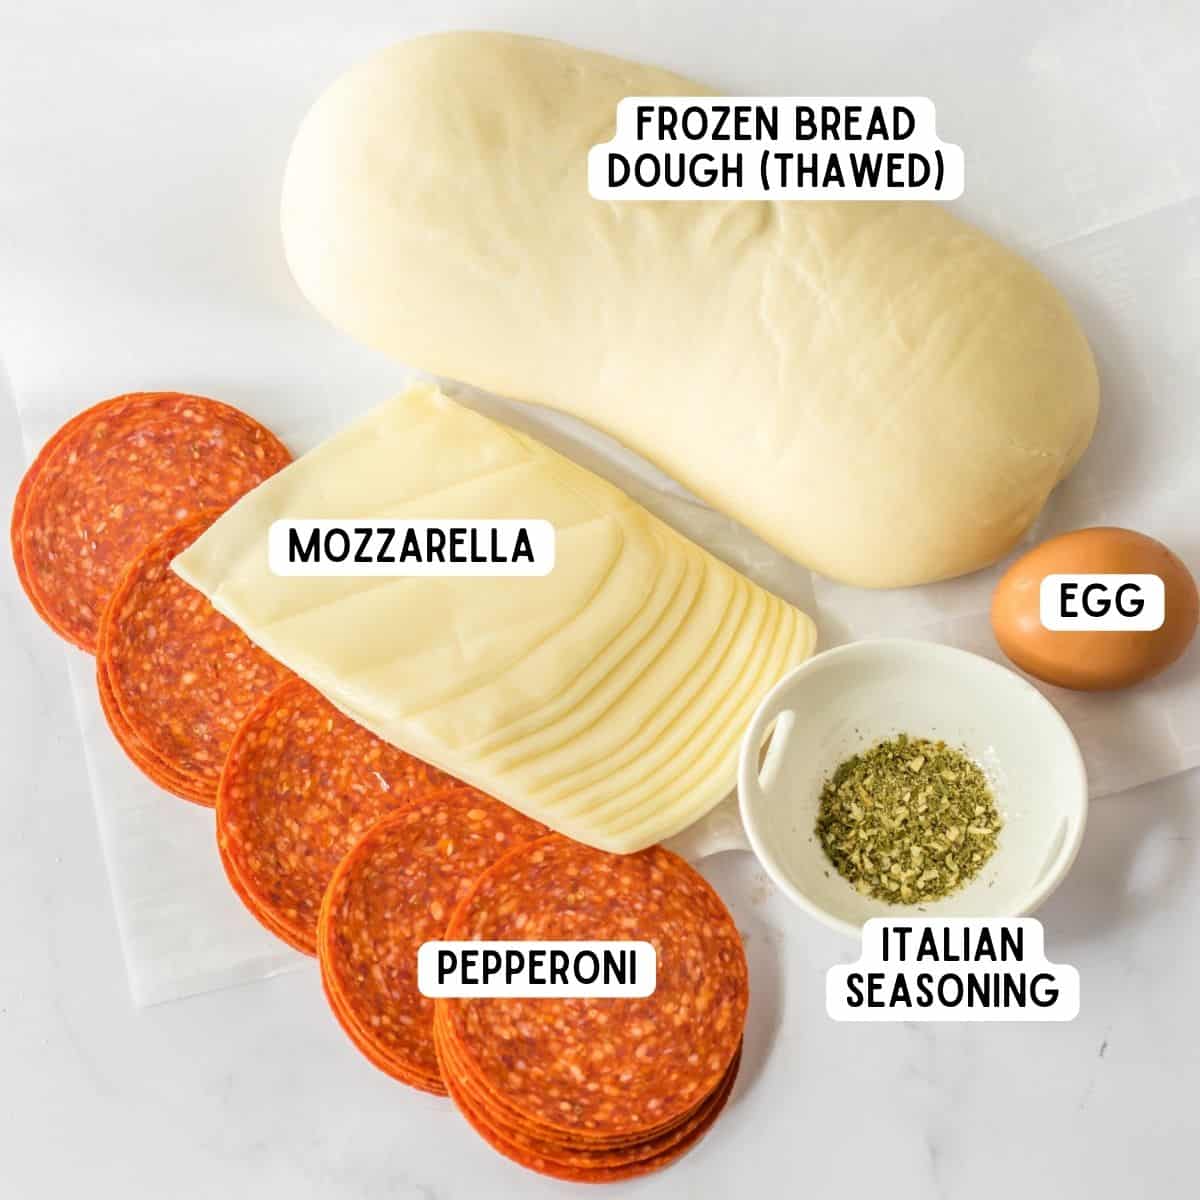 Pepperoni bread ingredients: frozen bread dough (thawed), slices of mozzarella cheese, pepperoni, Italian seasoning, and an egg.